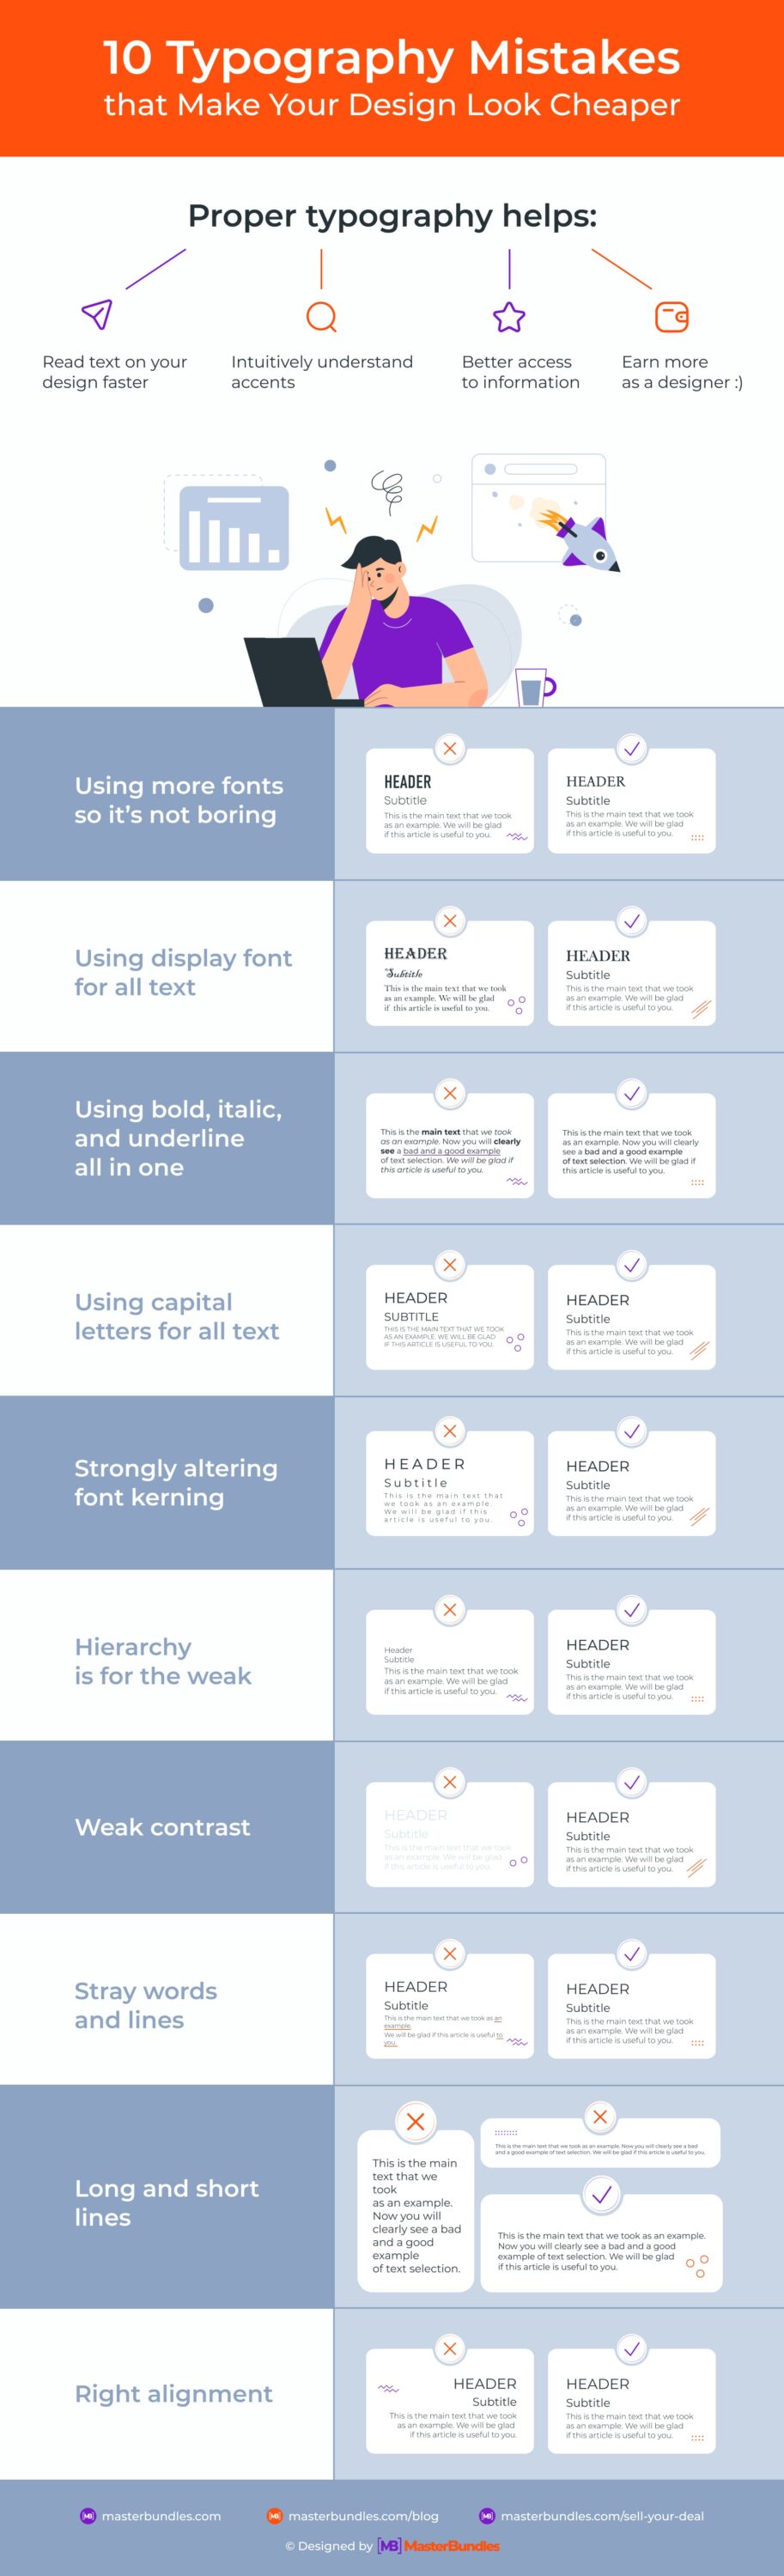 10 Typography Mistakes that Make Your Design Cheaper in Infographic.